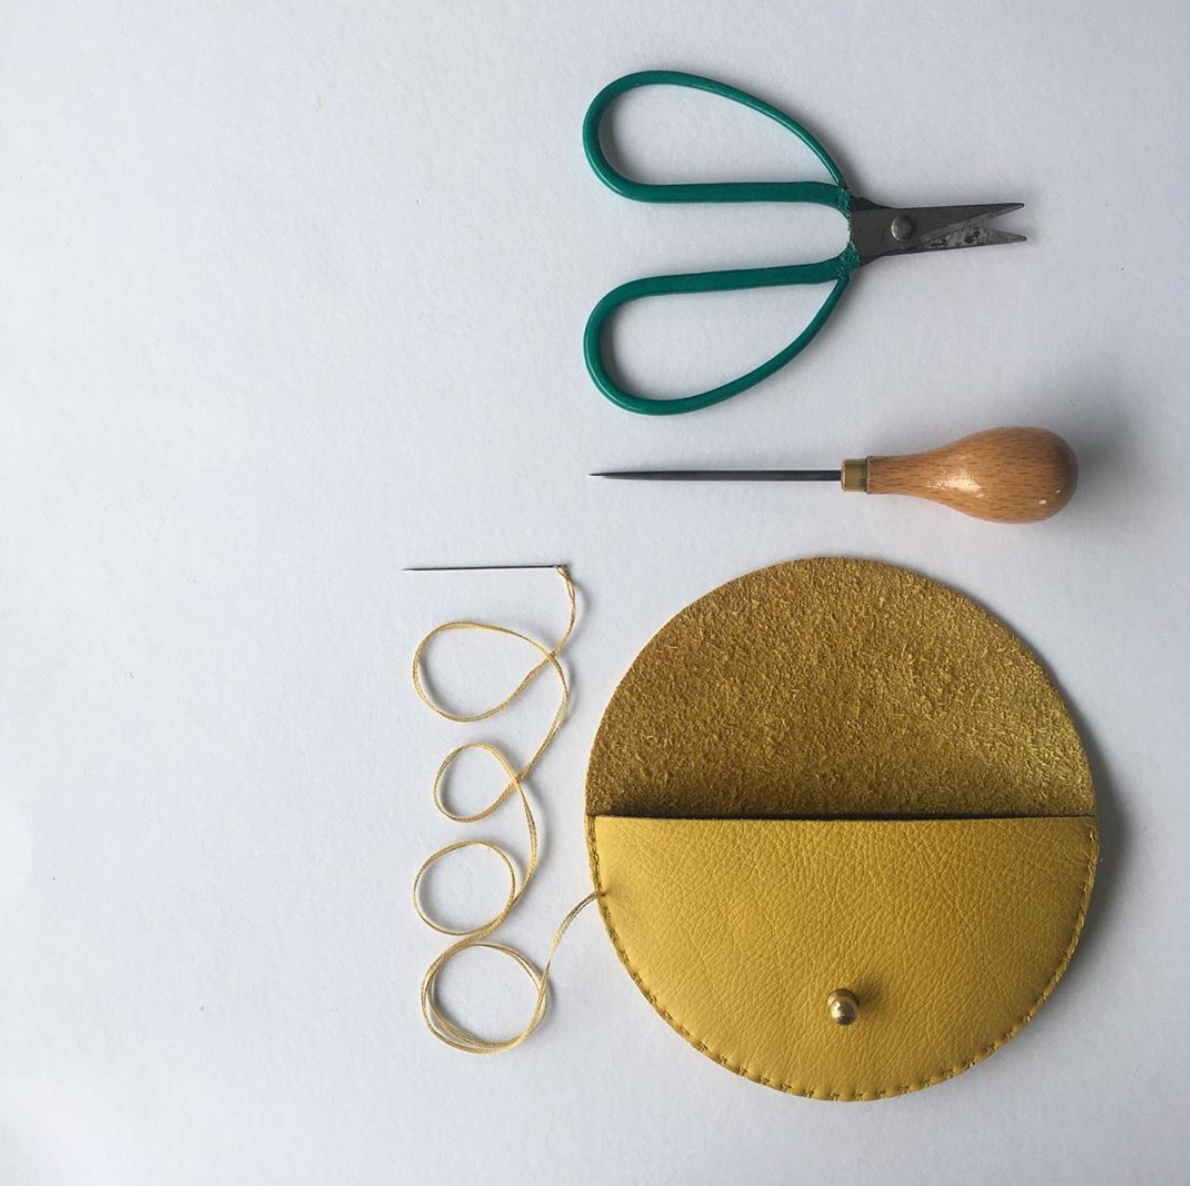 Colette Grande Coin Purse in Leather & Suede | various | by Jude Gove - Lifestory - Jude Gove